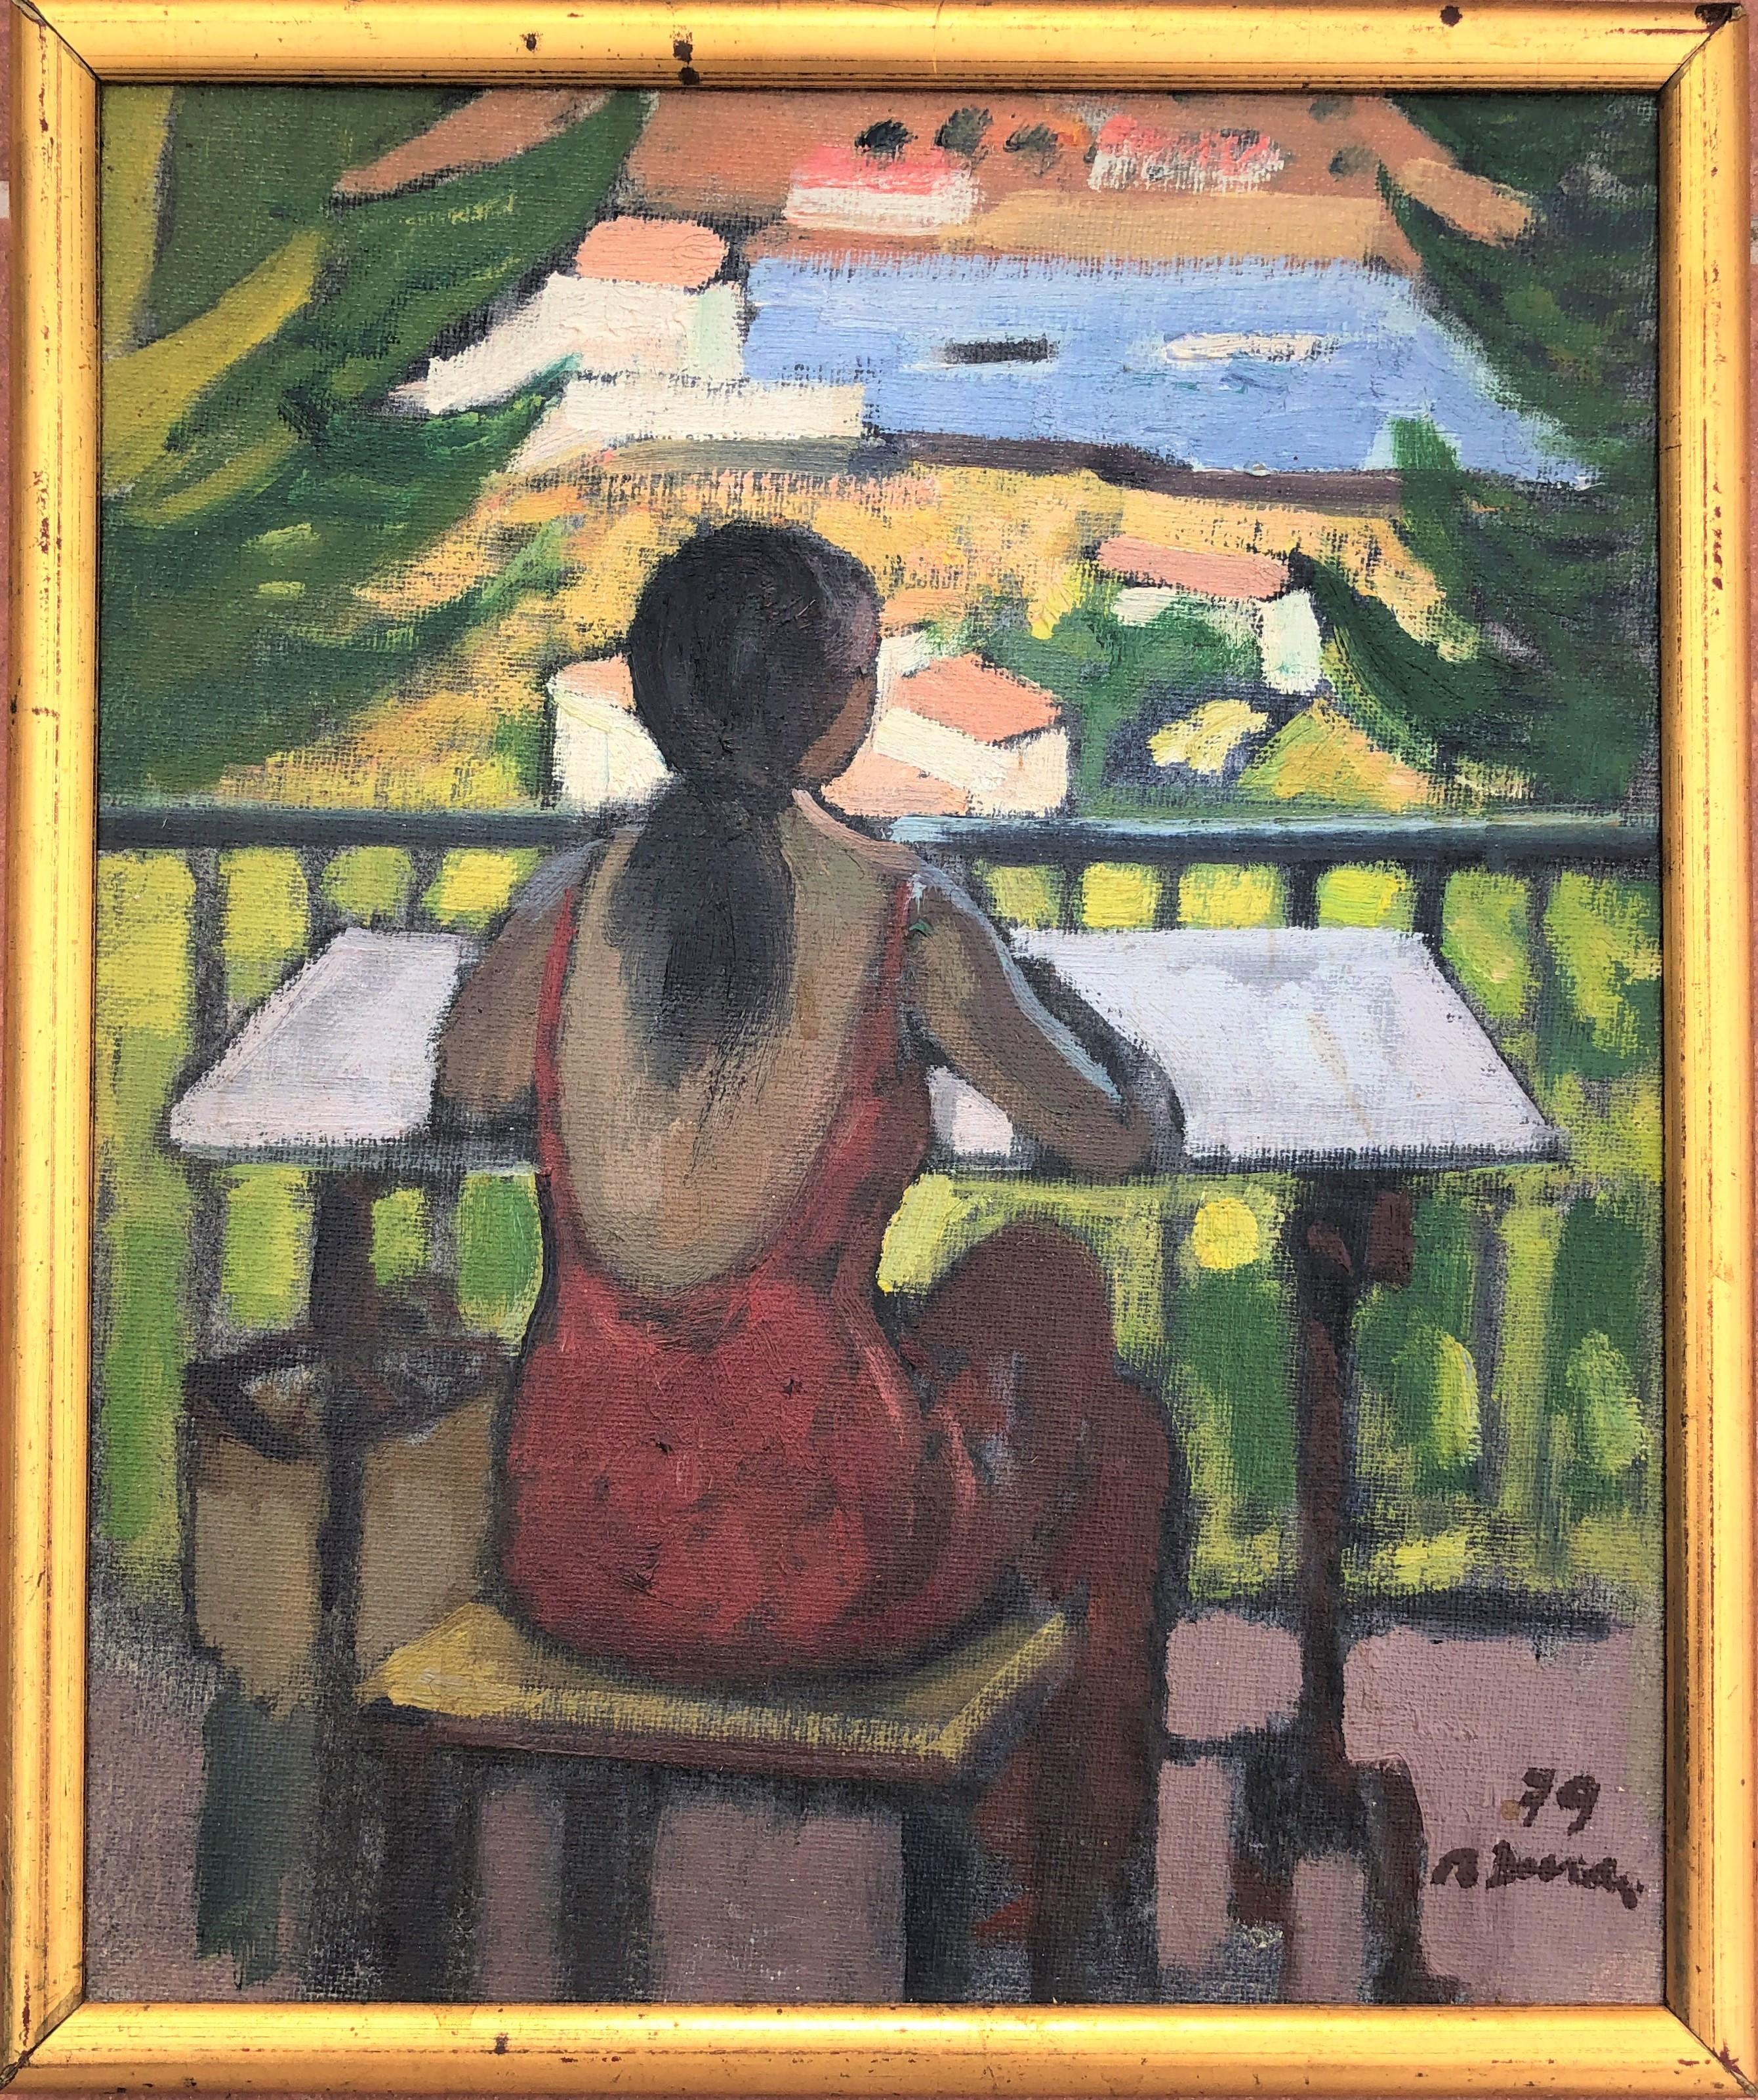 Woman on the balcony, Cadaques Spain seascape oil painting - Painting by Rafael Duran Benet